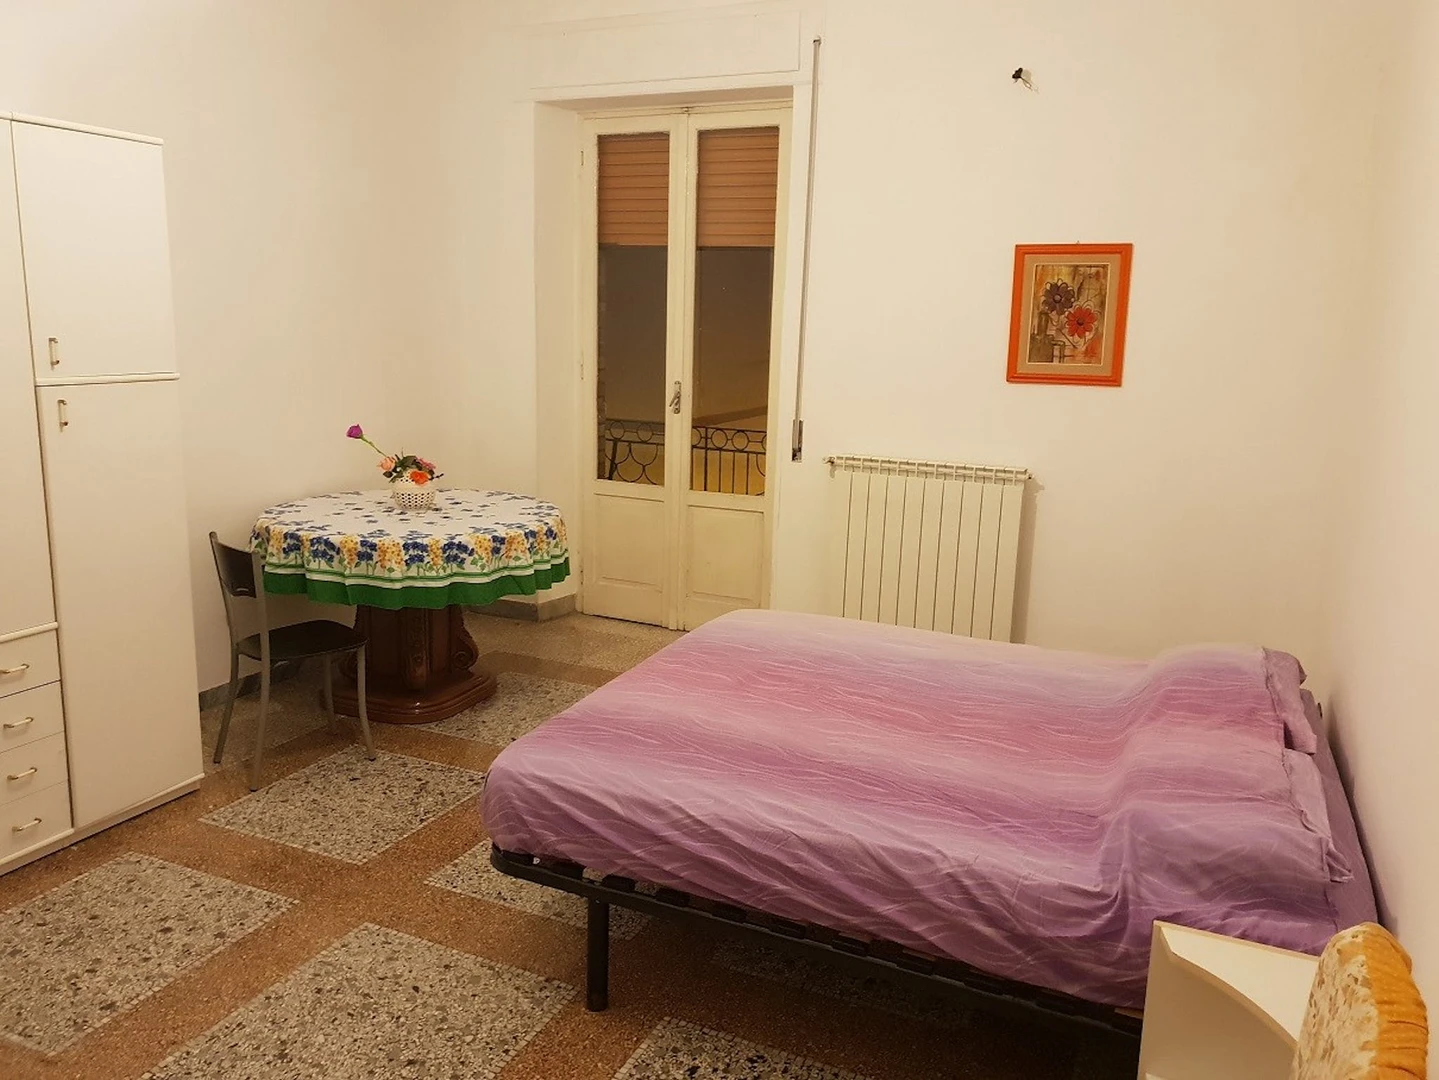 Renting rooms by the month in foggia